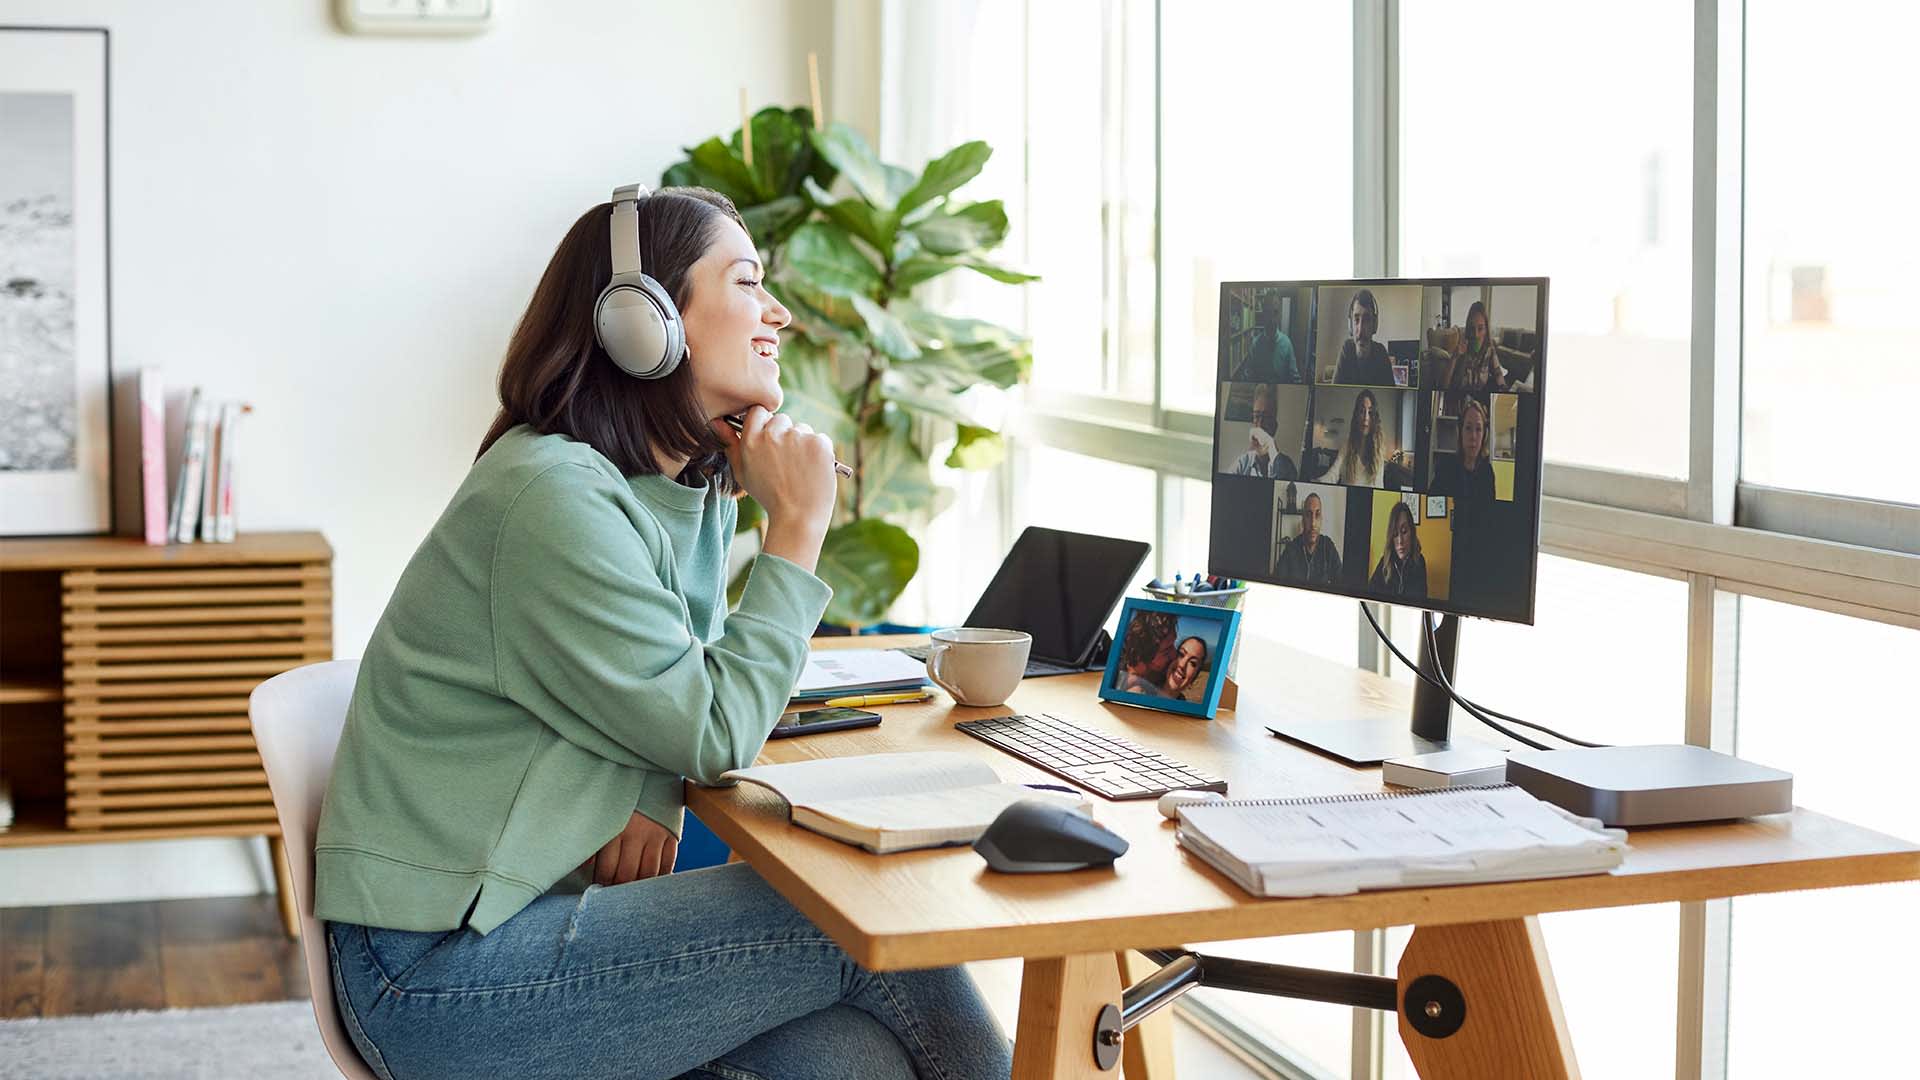 Microsoft Has 1 Simple Fix to Make Your Virtual Meetings Less Awkward. It's An Ancient Solution